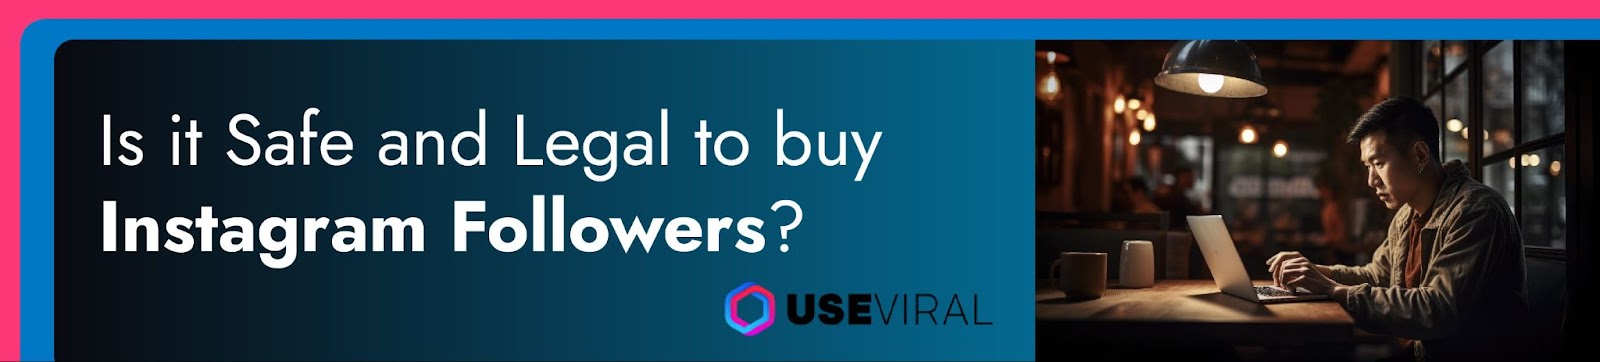 Is it Safe and Legal to buy Instagram Followers?